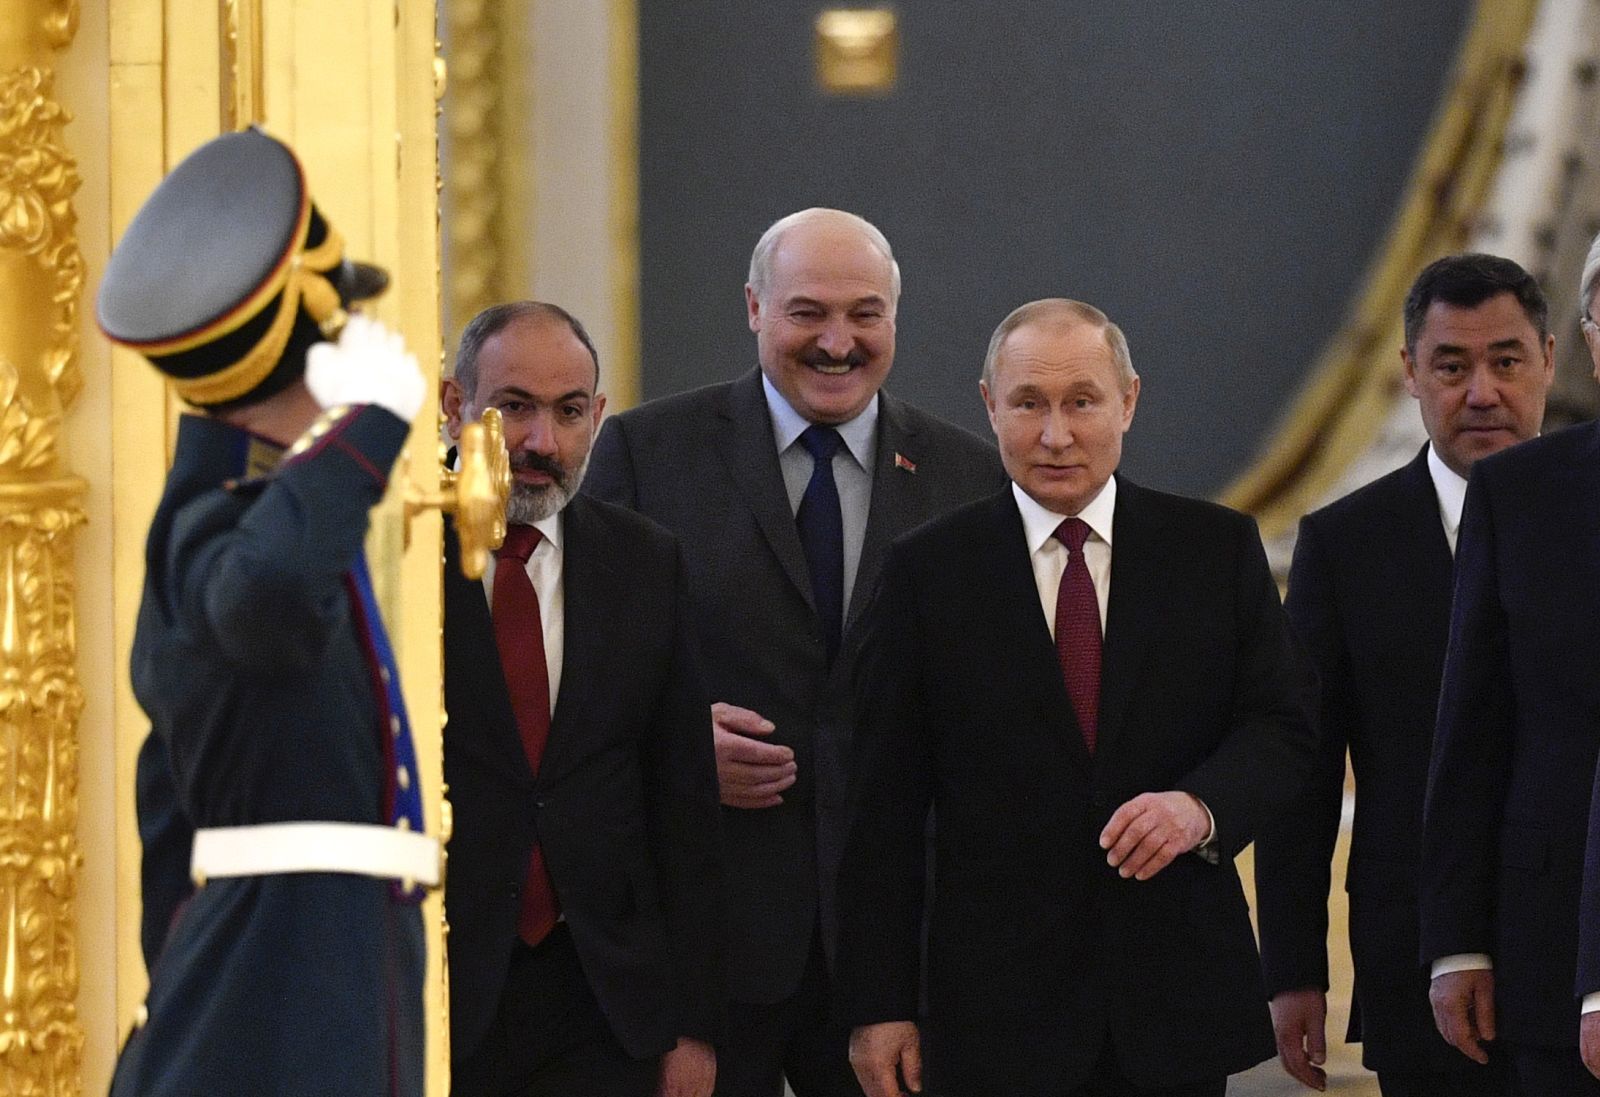 epa09950758 (L-R) Armenian Prime Minister Nikol Pashinyan, Belarus' President Alexander Lukashenko, Russian President Vladimir Putin, Kyrgyzstan's President Sadyr Japarov, Kazakhstan's President Kassym-Jomart Tokayev and Tajikistan's President Emomali Rakhmon enter a hall prior to a meeting of the leaders of the Collective Security Treaty Organization (CSTO) member states at the Kremlin in Moscow, Russia, 16 May 2022. Moscow is hosting the CSTO summit, timed to coincide with the 30th anniversary of the signing of the Collective Security Treaty and the 20th anniversary of the creation of the Organization, which includes Armenia, Belarus, Kazakhstan, Kyrgyzstan, Russia and Tajikistan.  EPA/ALEXANDER NEMENOV / POOL